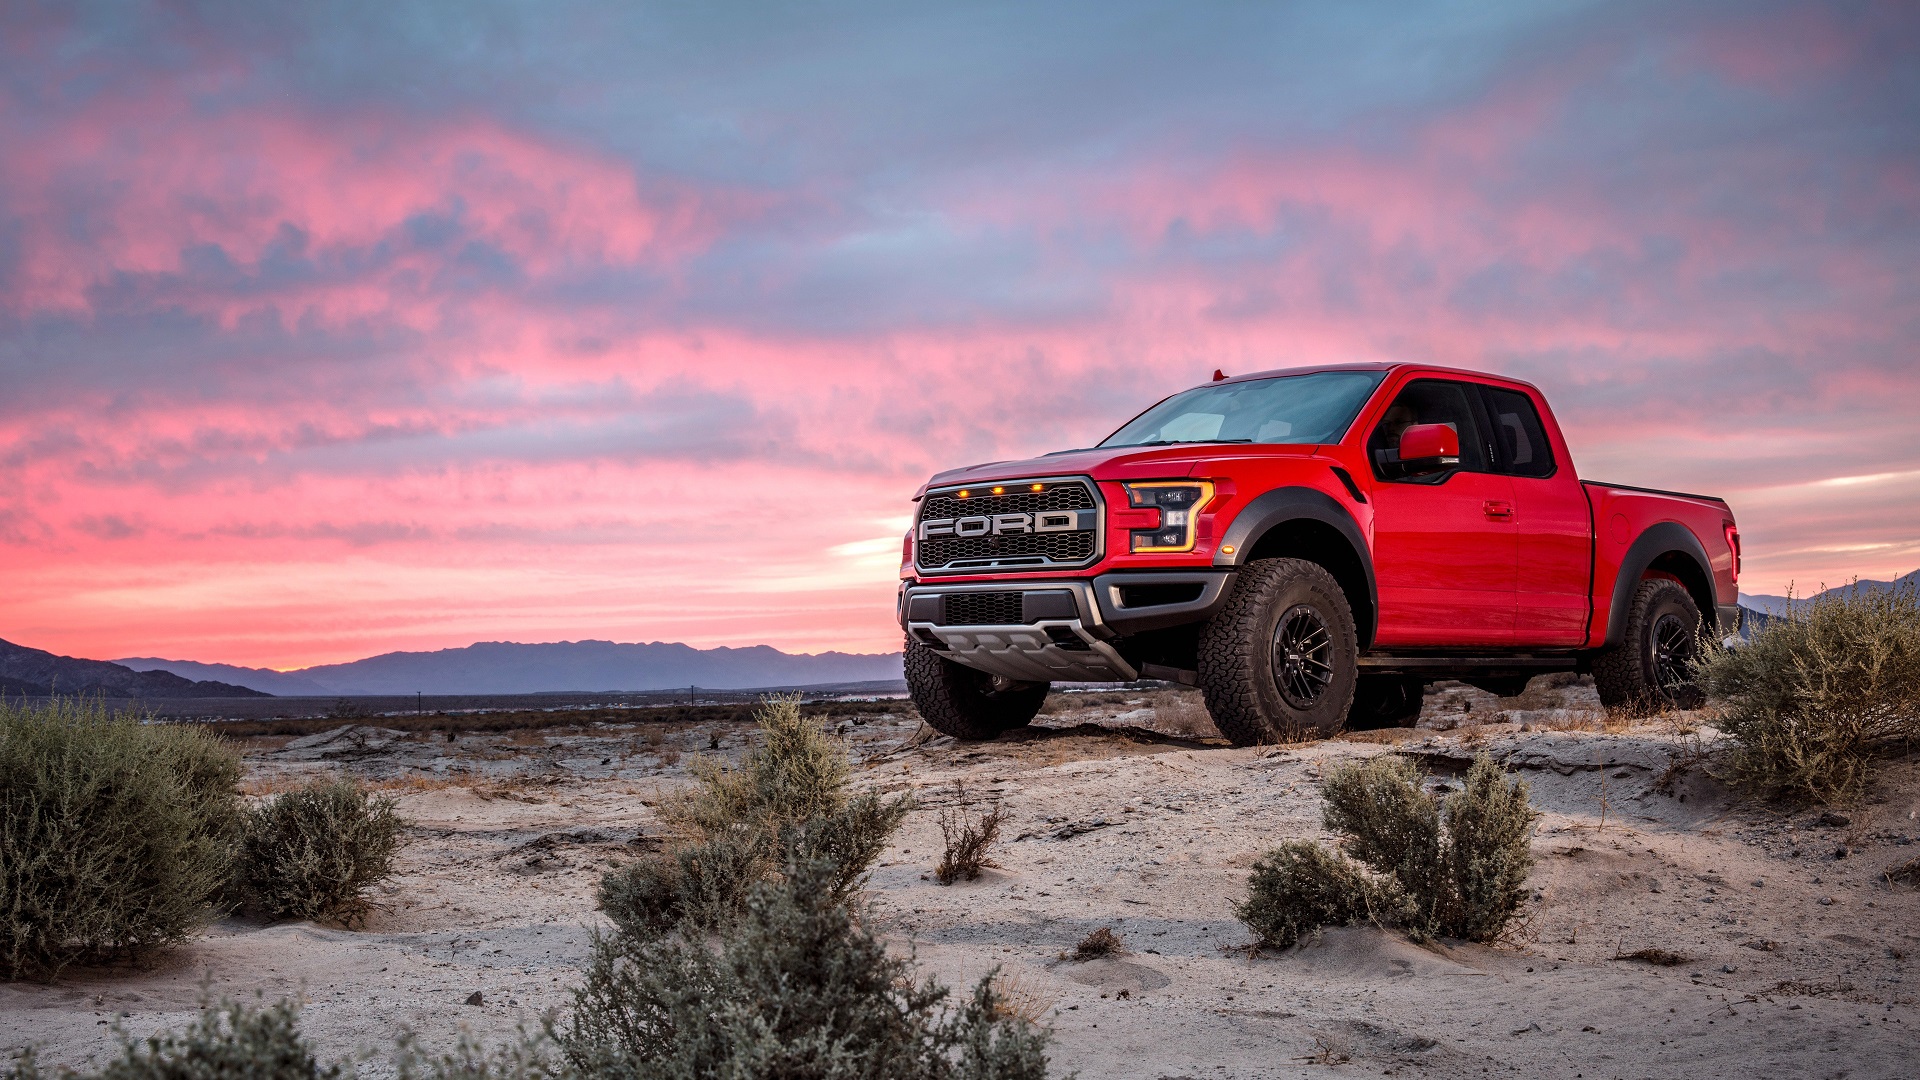 Ford Ford Raptor Ford F 150 Ford F 150 Raptor Car Pick Up Trucks Nature Sunset Red Cars 8451